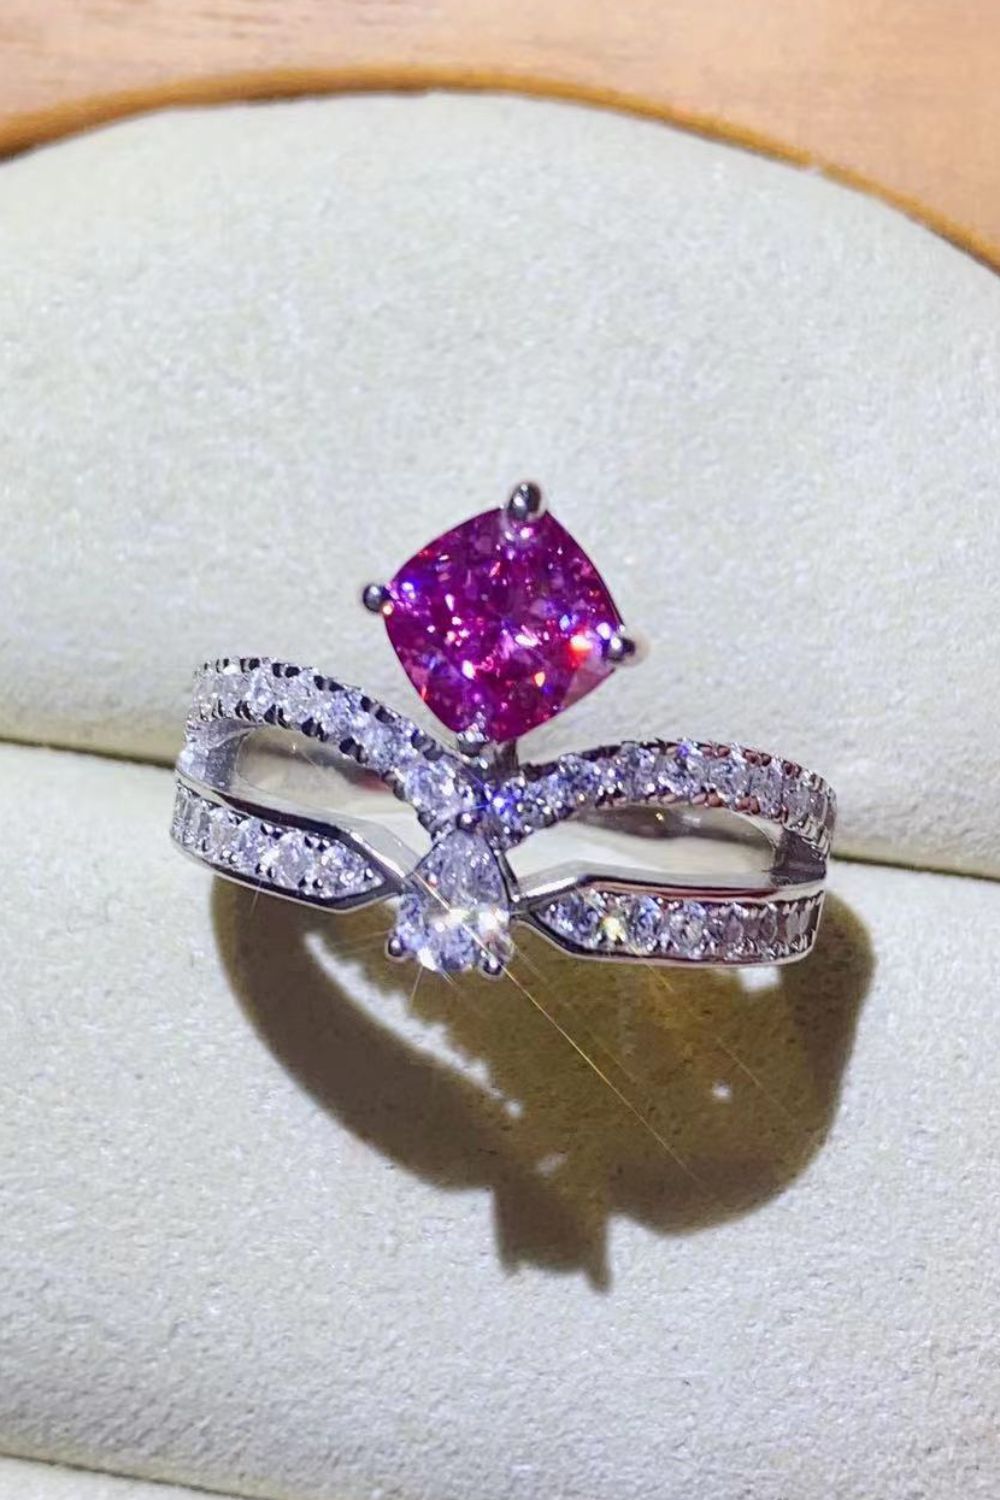 At Your Best 1 Carat Pink Pink Moissanite Ring (Platinum Over Pure Sterling Silver)